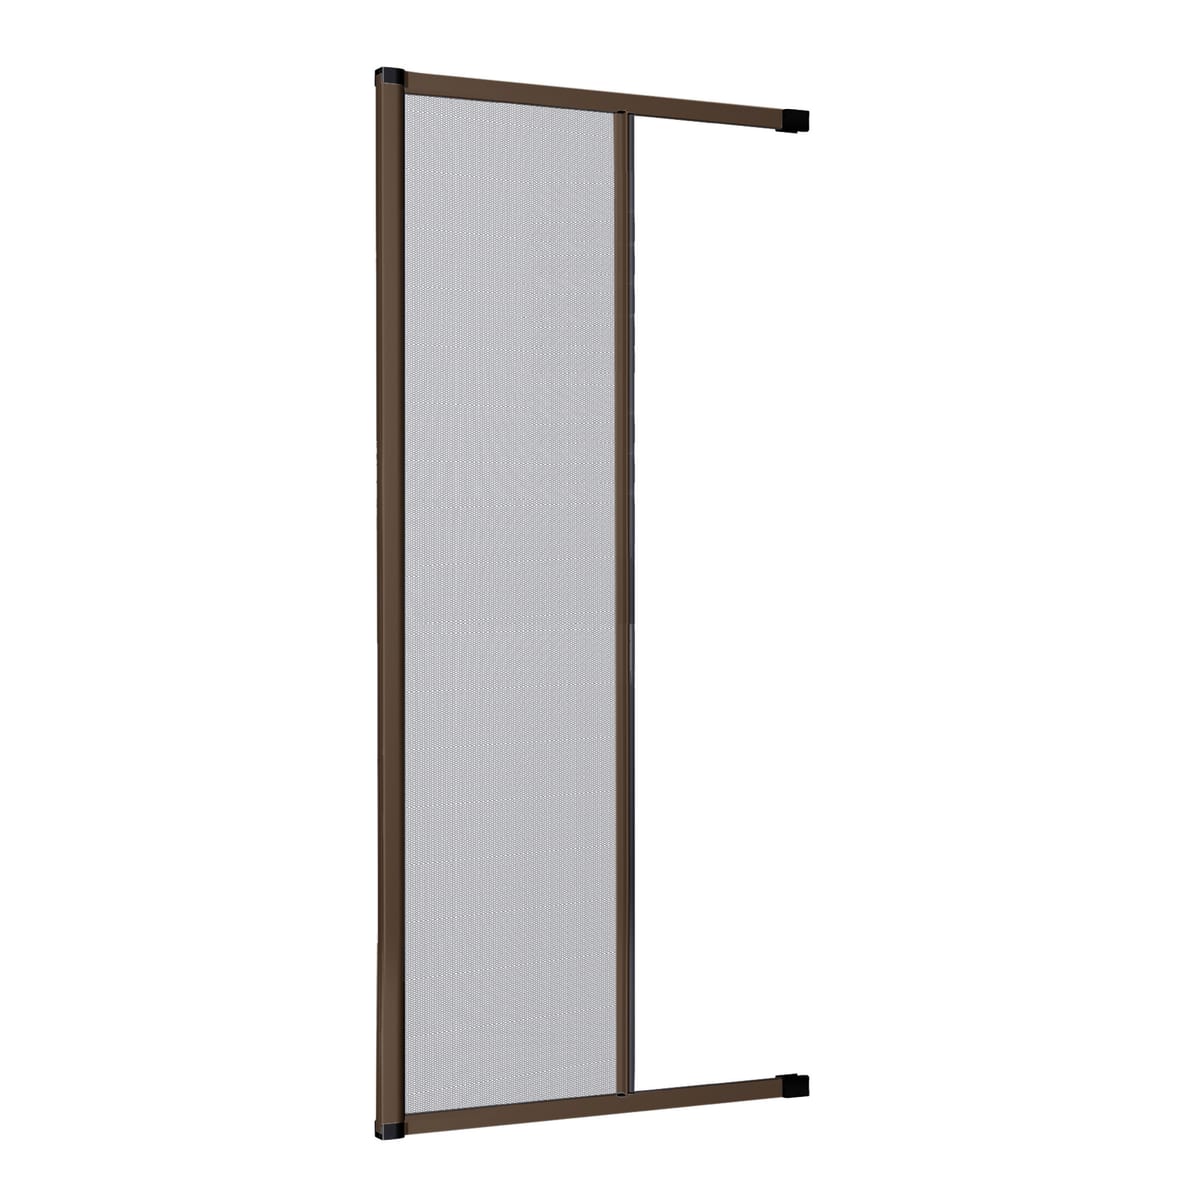 MOSQUITO SCREEN IN BROWN HORIZONTAL KIT WITH SCREWS+CLUTCH 160X250 CM